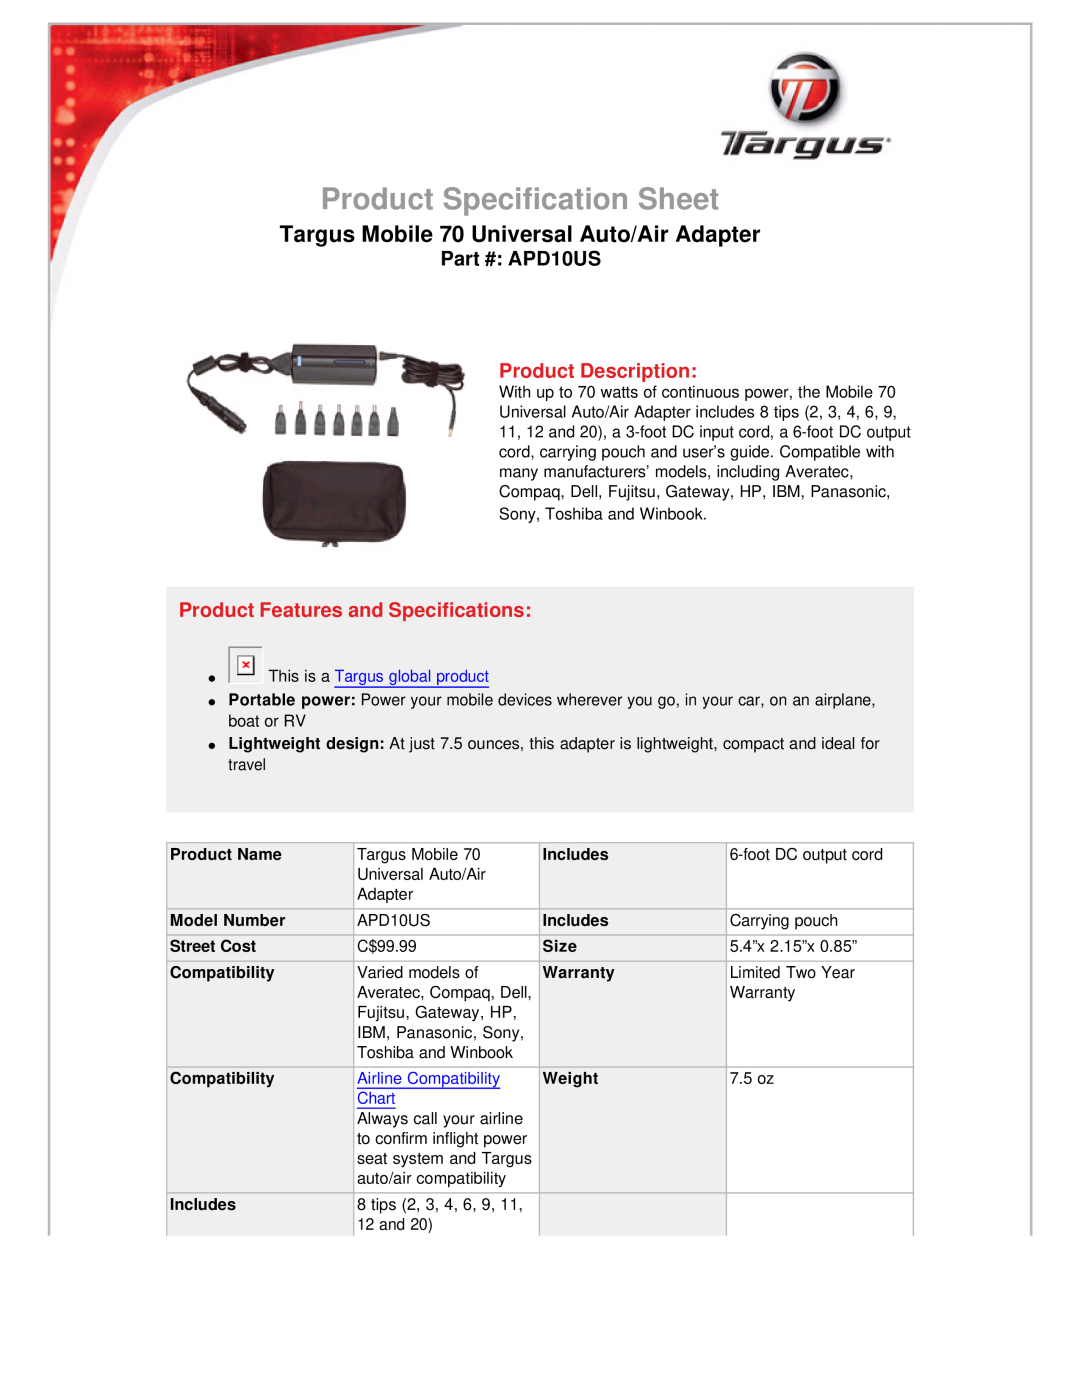 Targus APD10US specifications Product Specification Sheet, Targus Mobile 70 Universal Auto/Air Adapter 